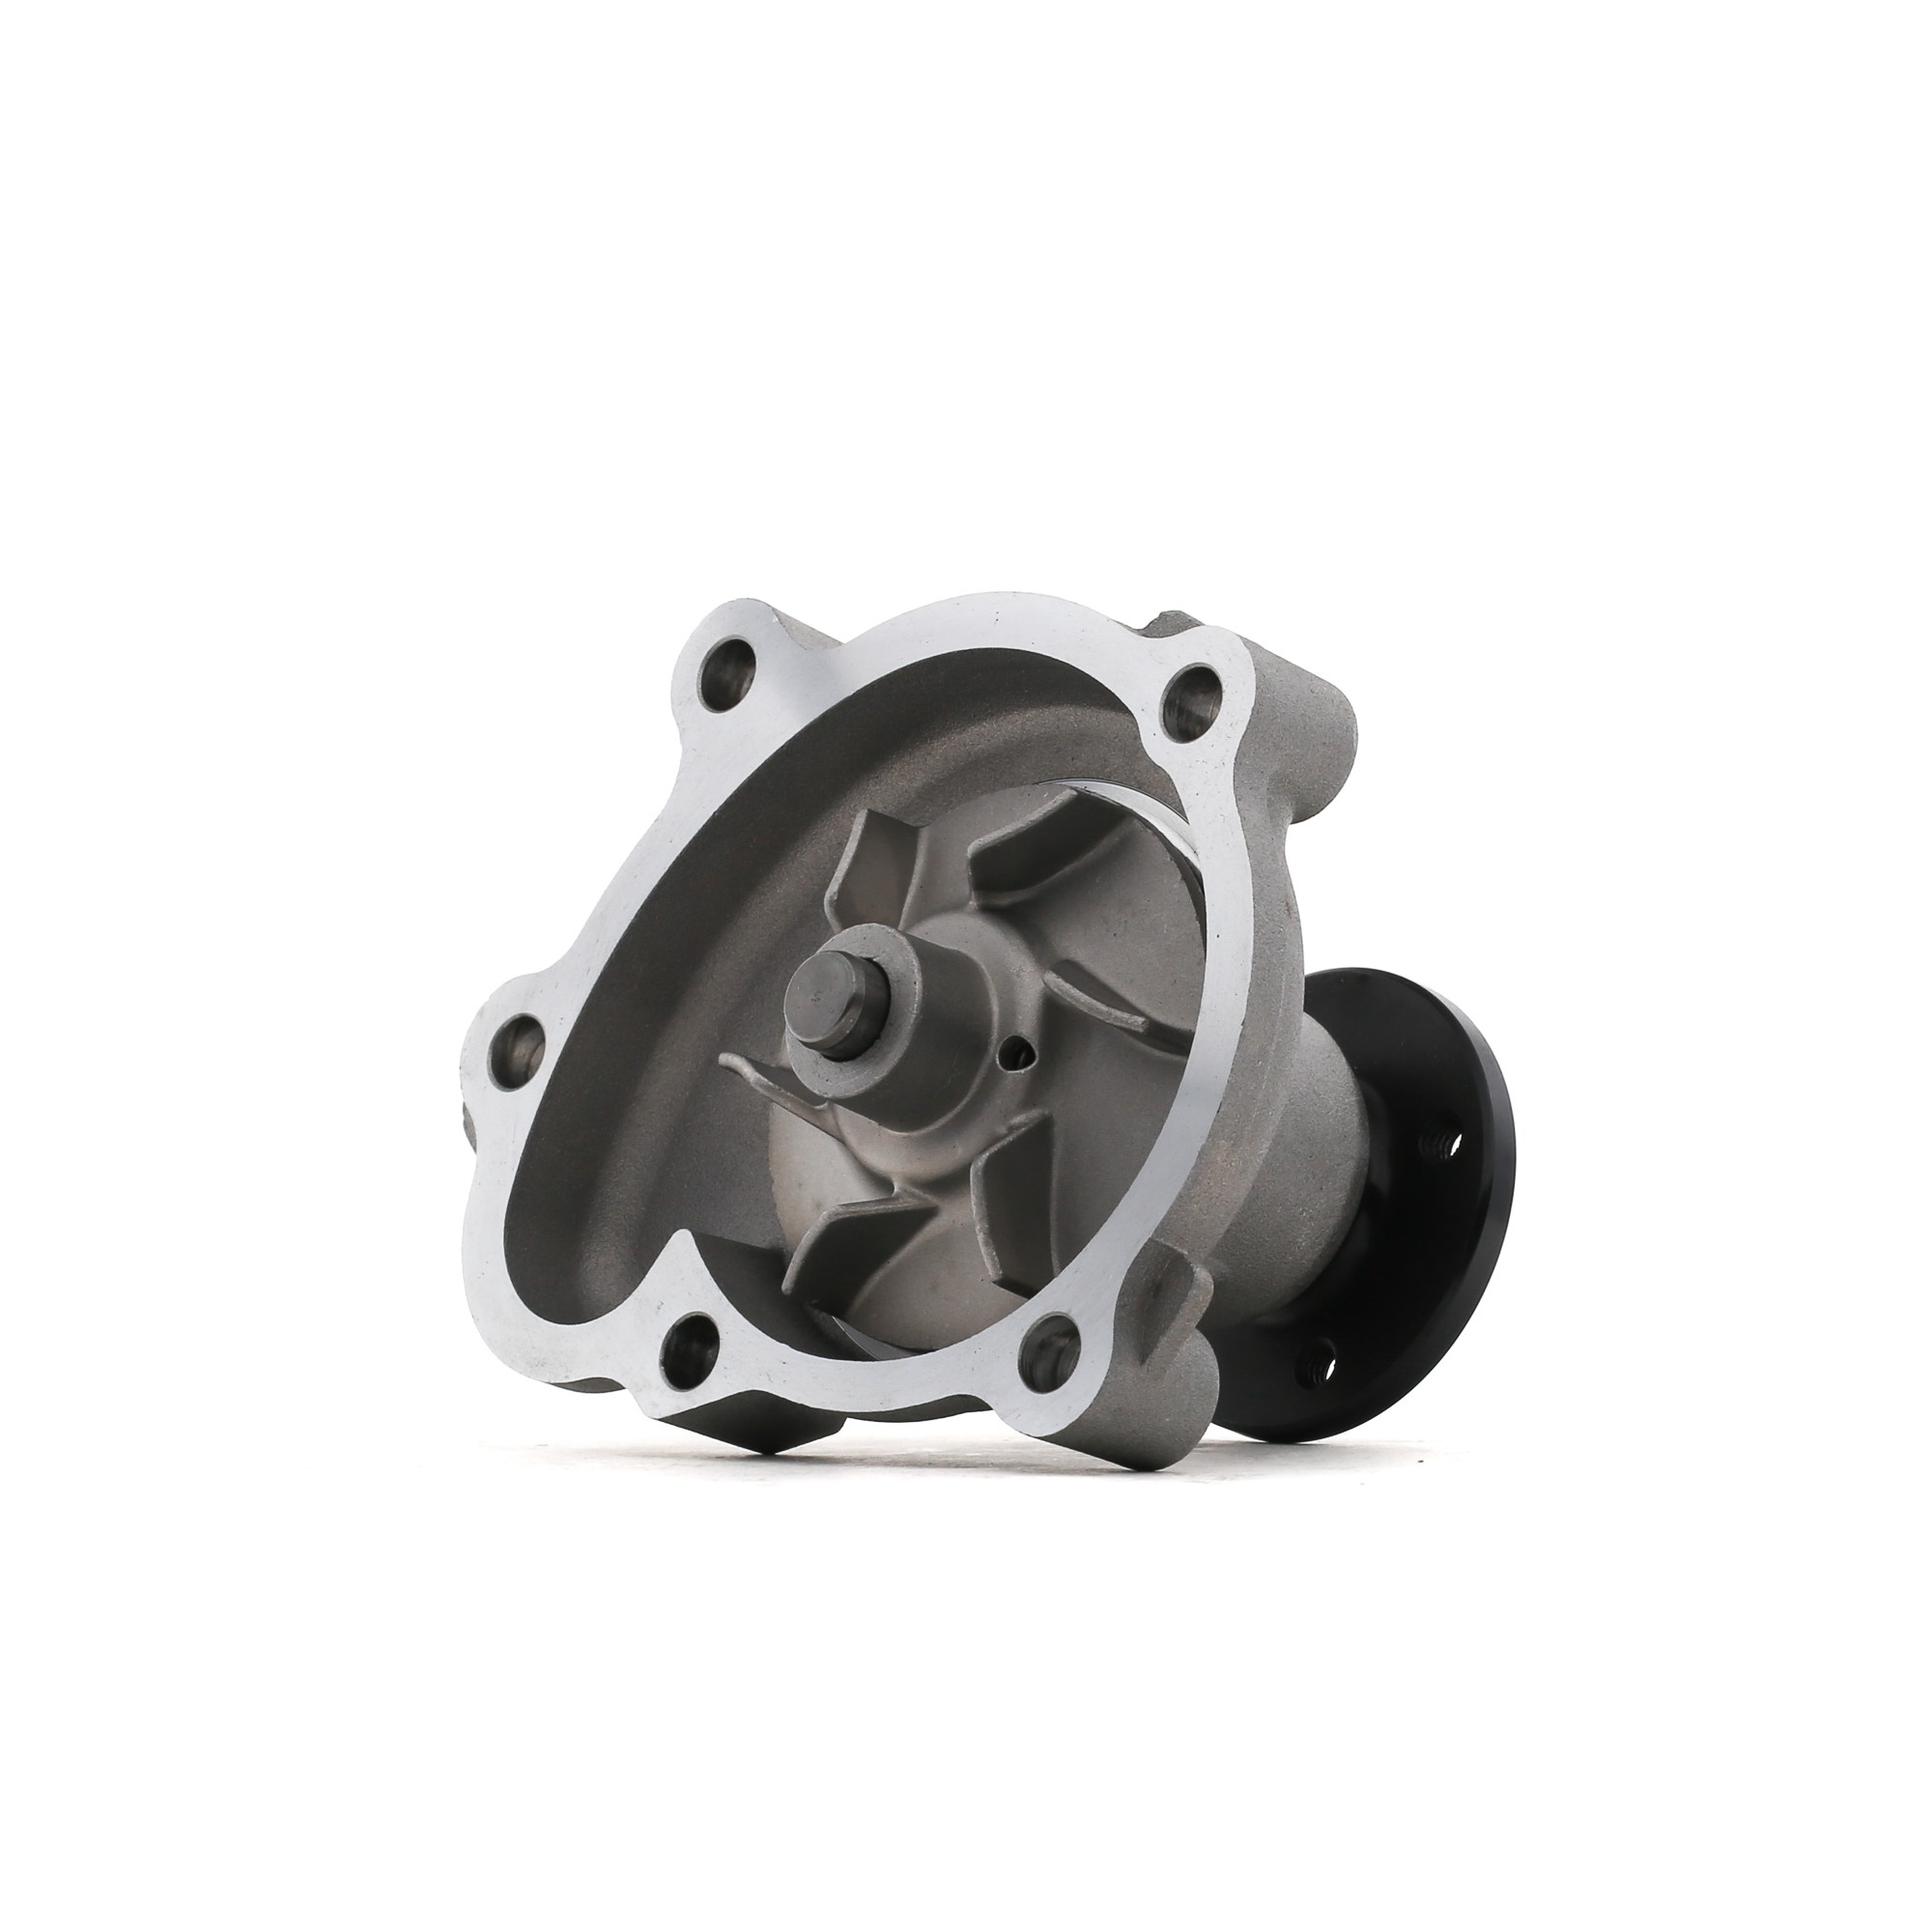 STARK SKWP-0520135 Water pump Cast Aluminium, without belt pulley, with seal, with bolts/screws, Mechanical, Metal impeller